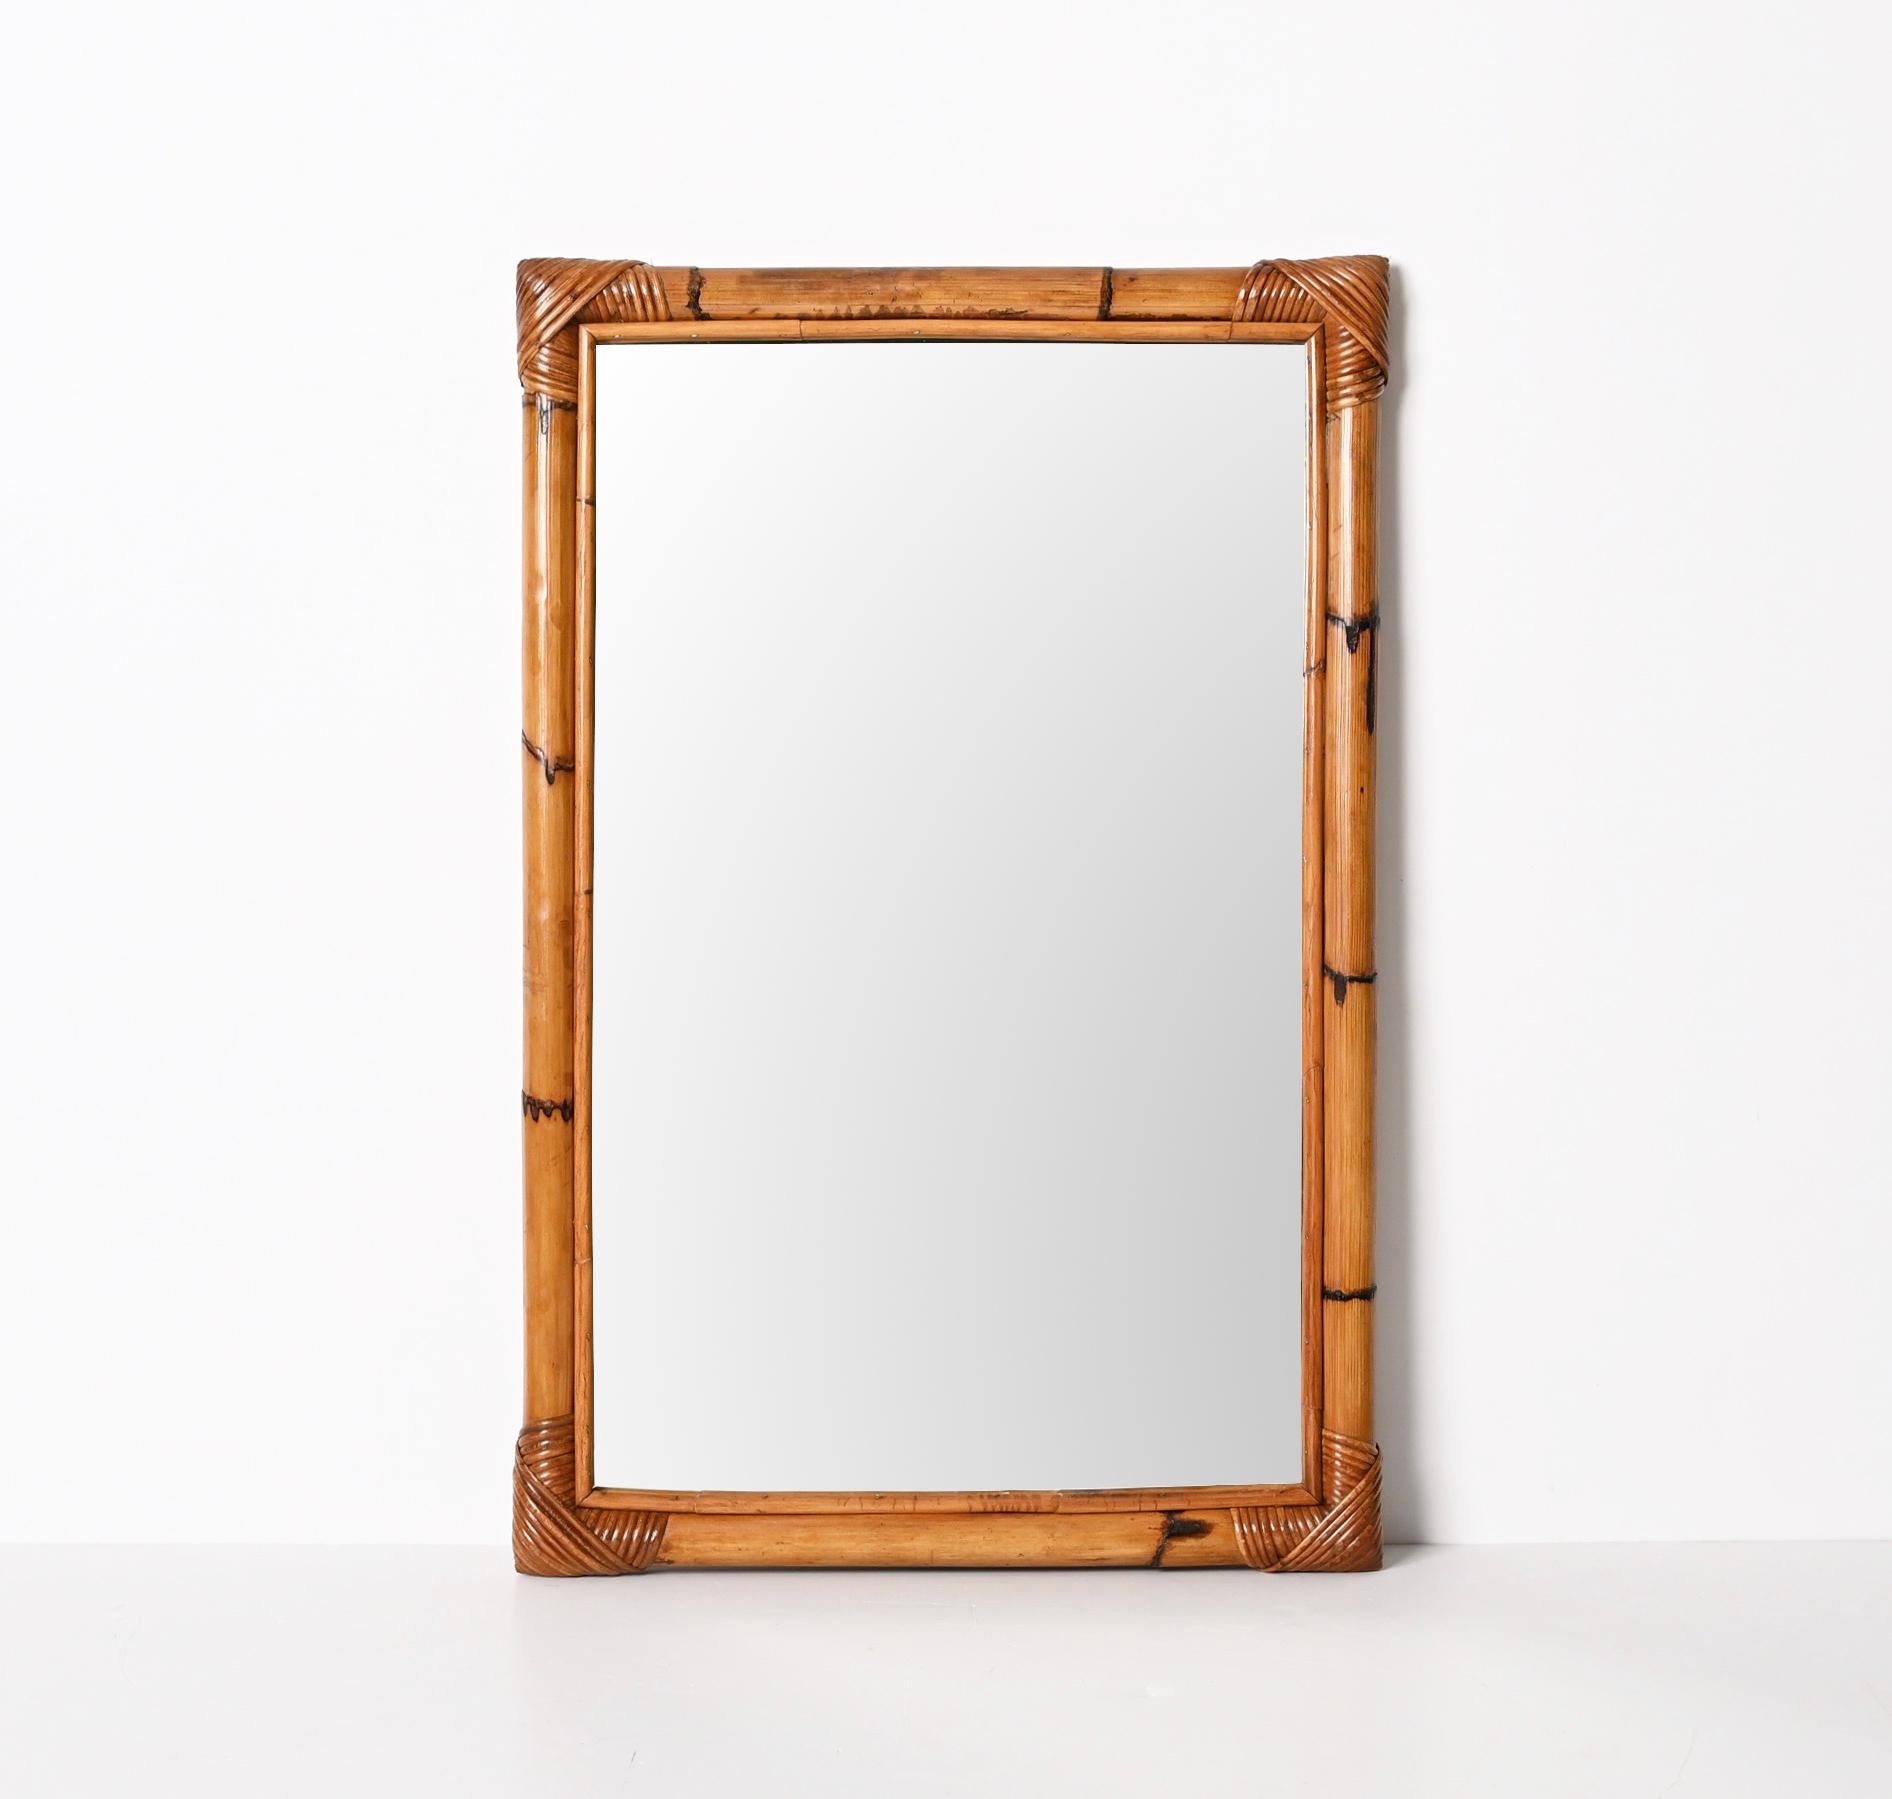 Midcentury Rectangular Italian Mirror with Double Bamboo Cane Frame, 1970s For Sale 11